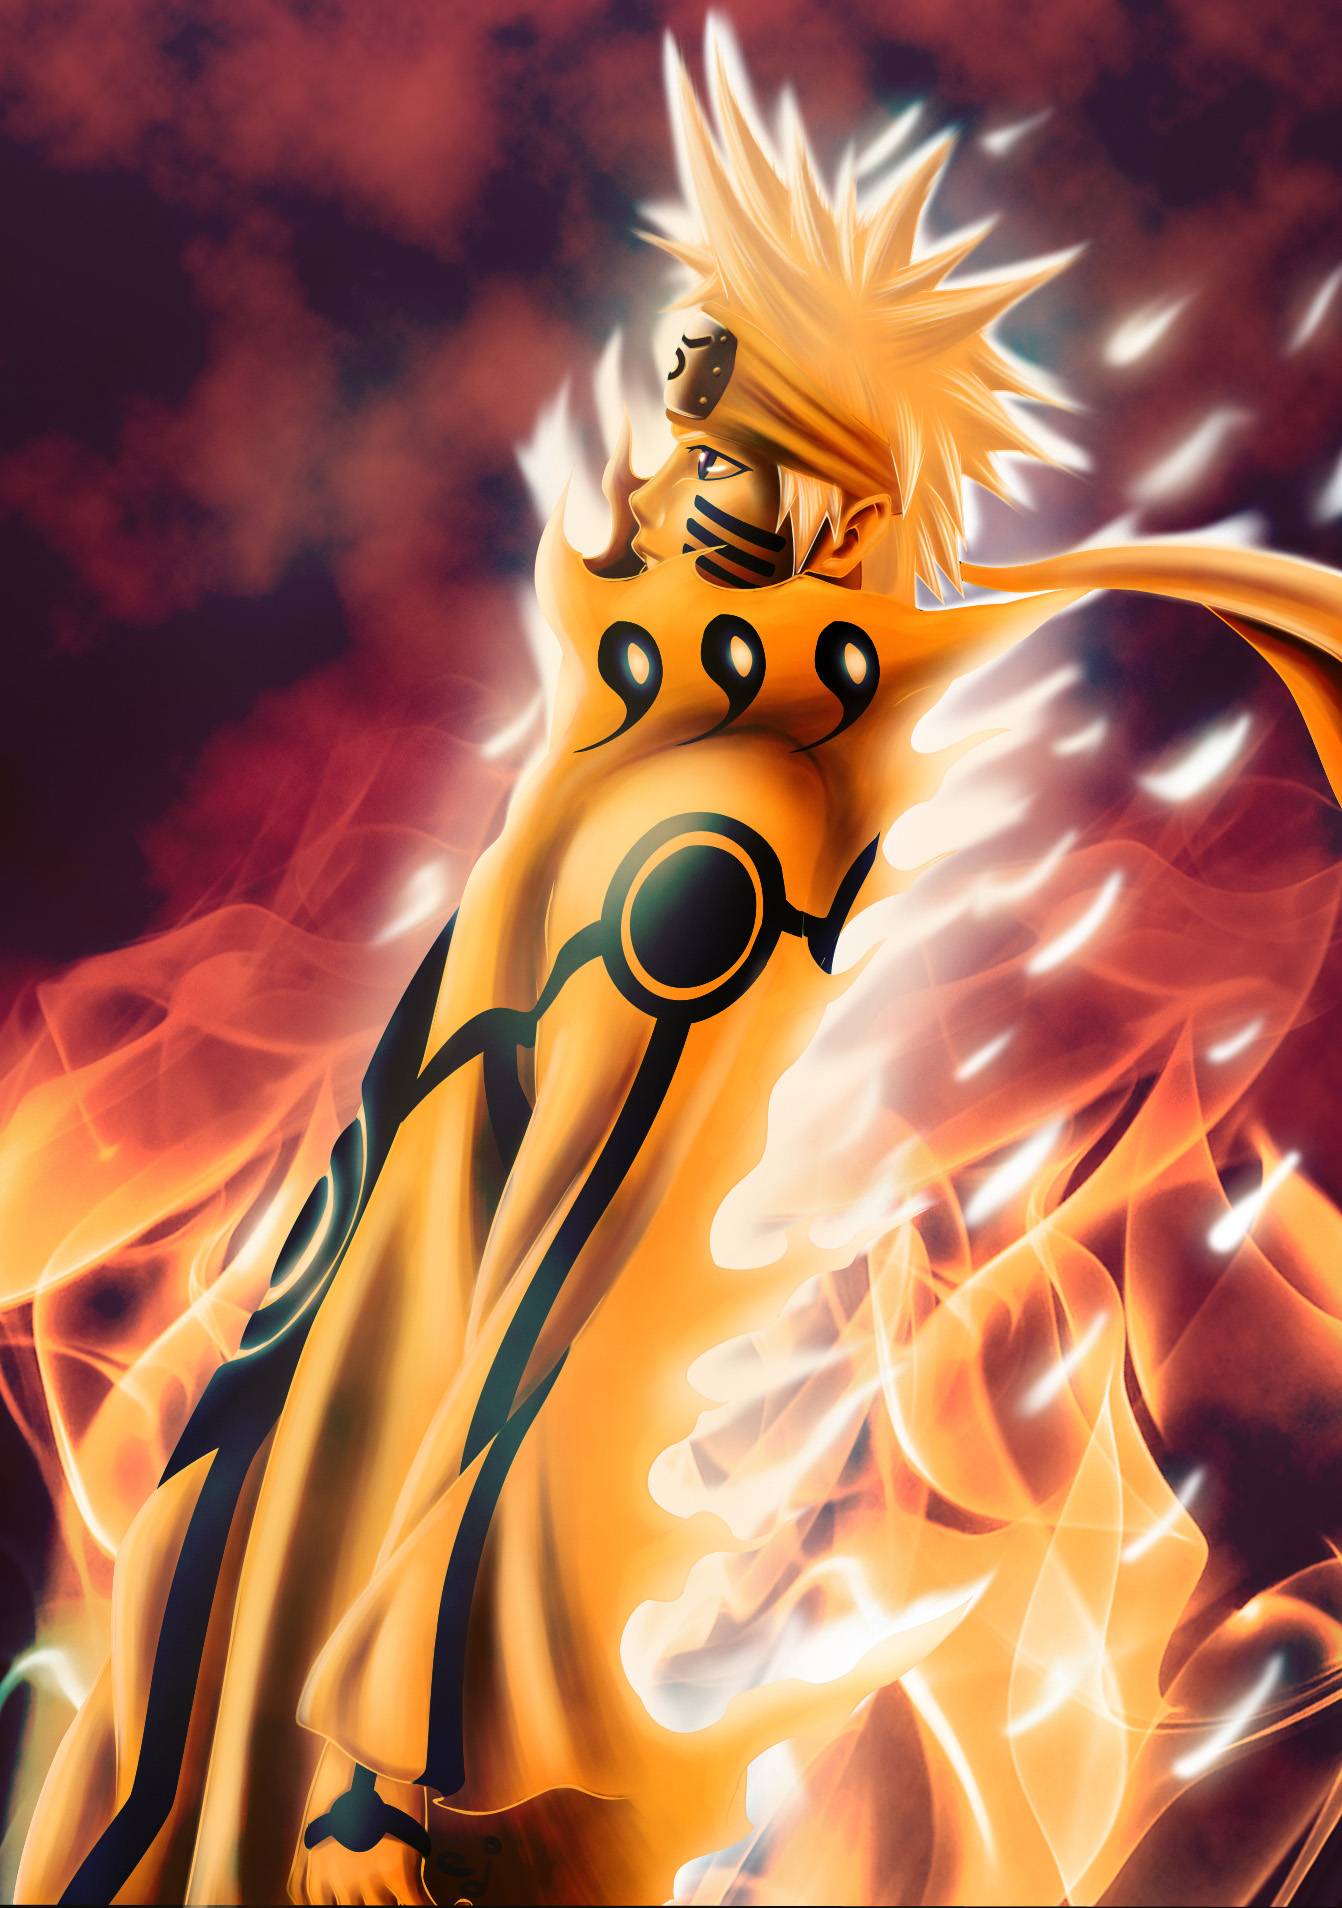 Anime Wallpaper for Naruto FanArt APK pour Android Télécharger